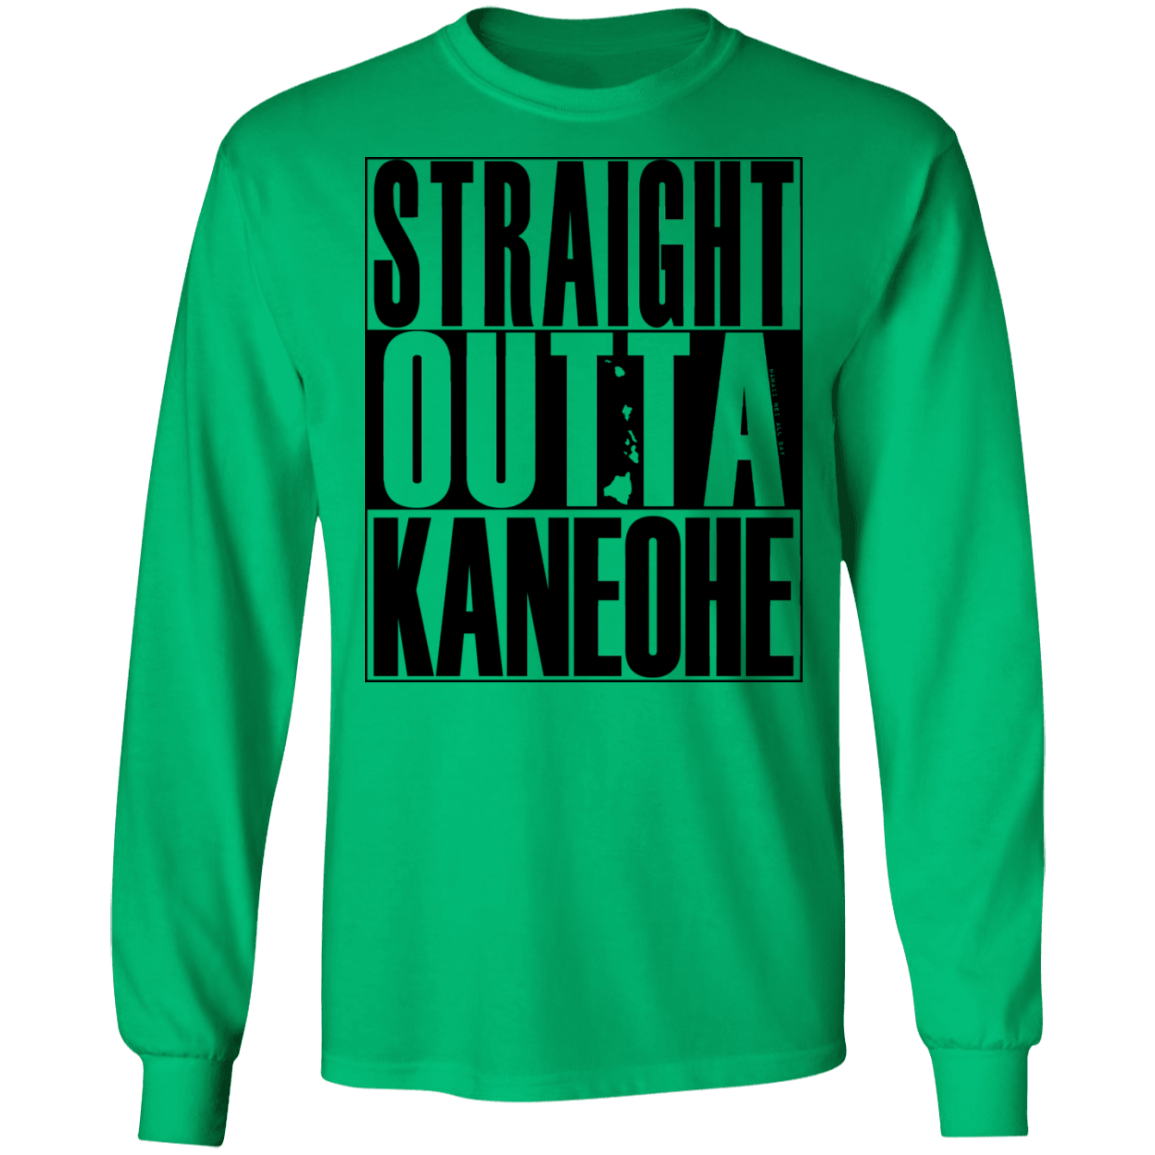 Straight Outta Kaneohe (black ink) LS T-Shirt